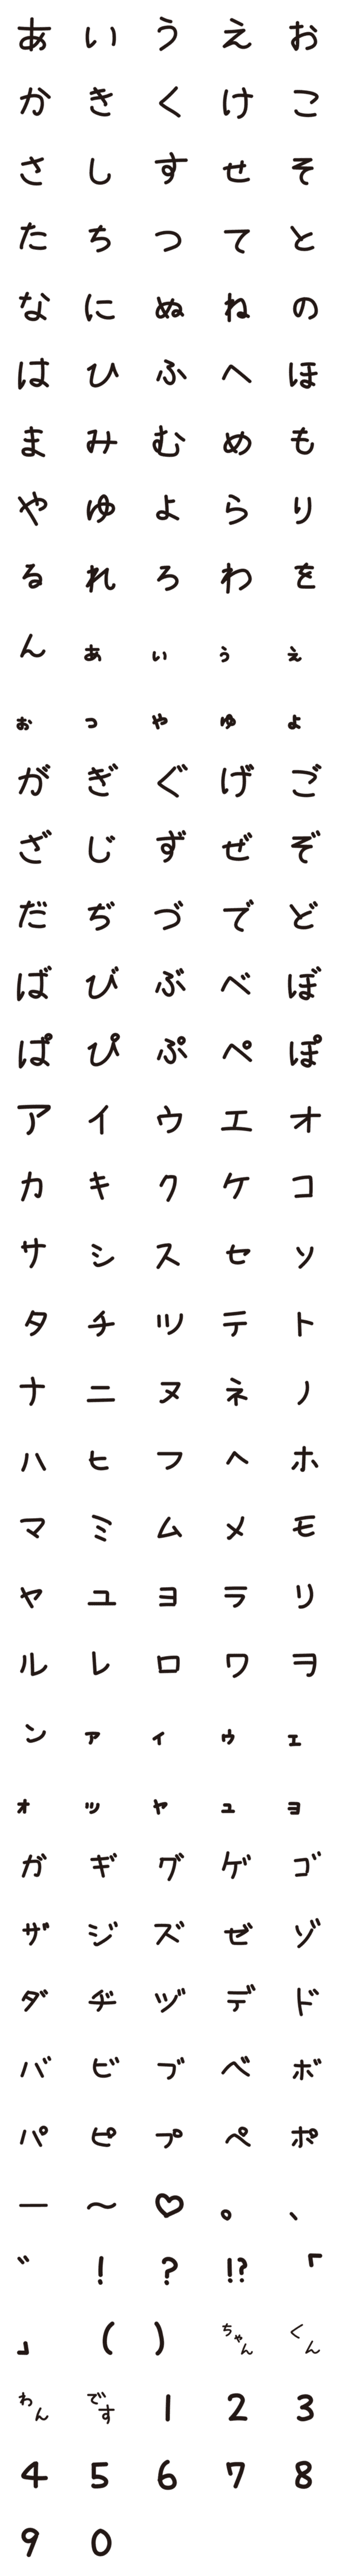 [LINE絵文字]1ちゃん文字の画像一覧